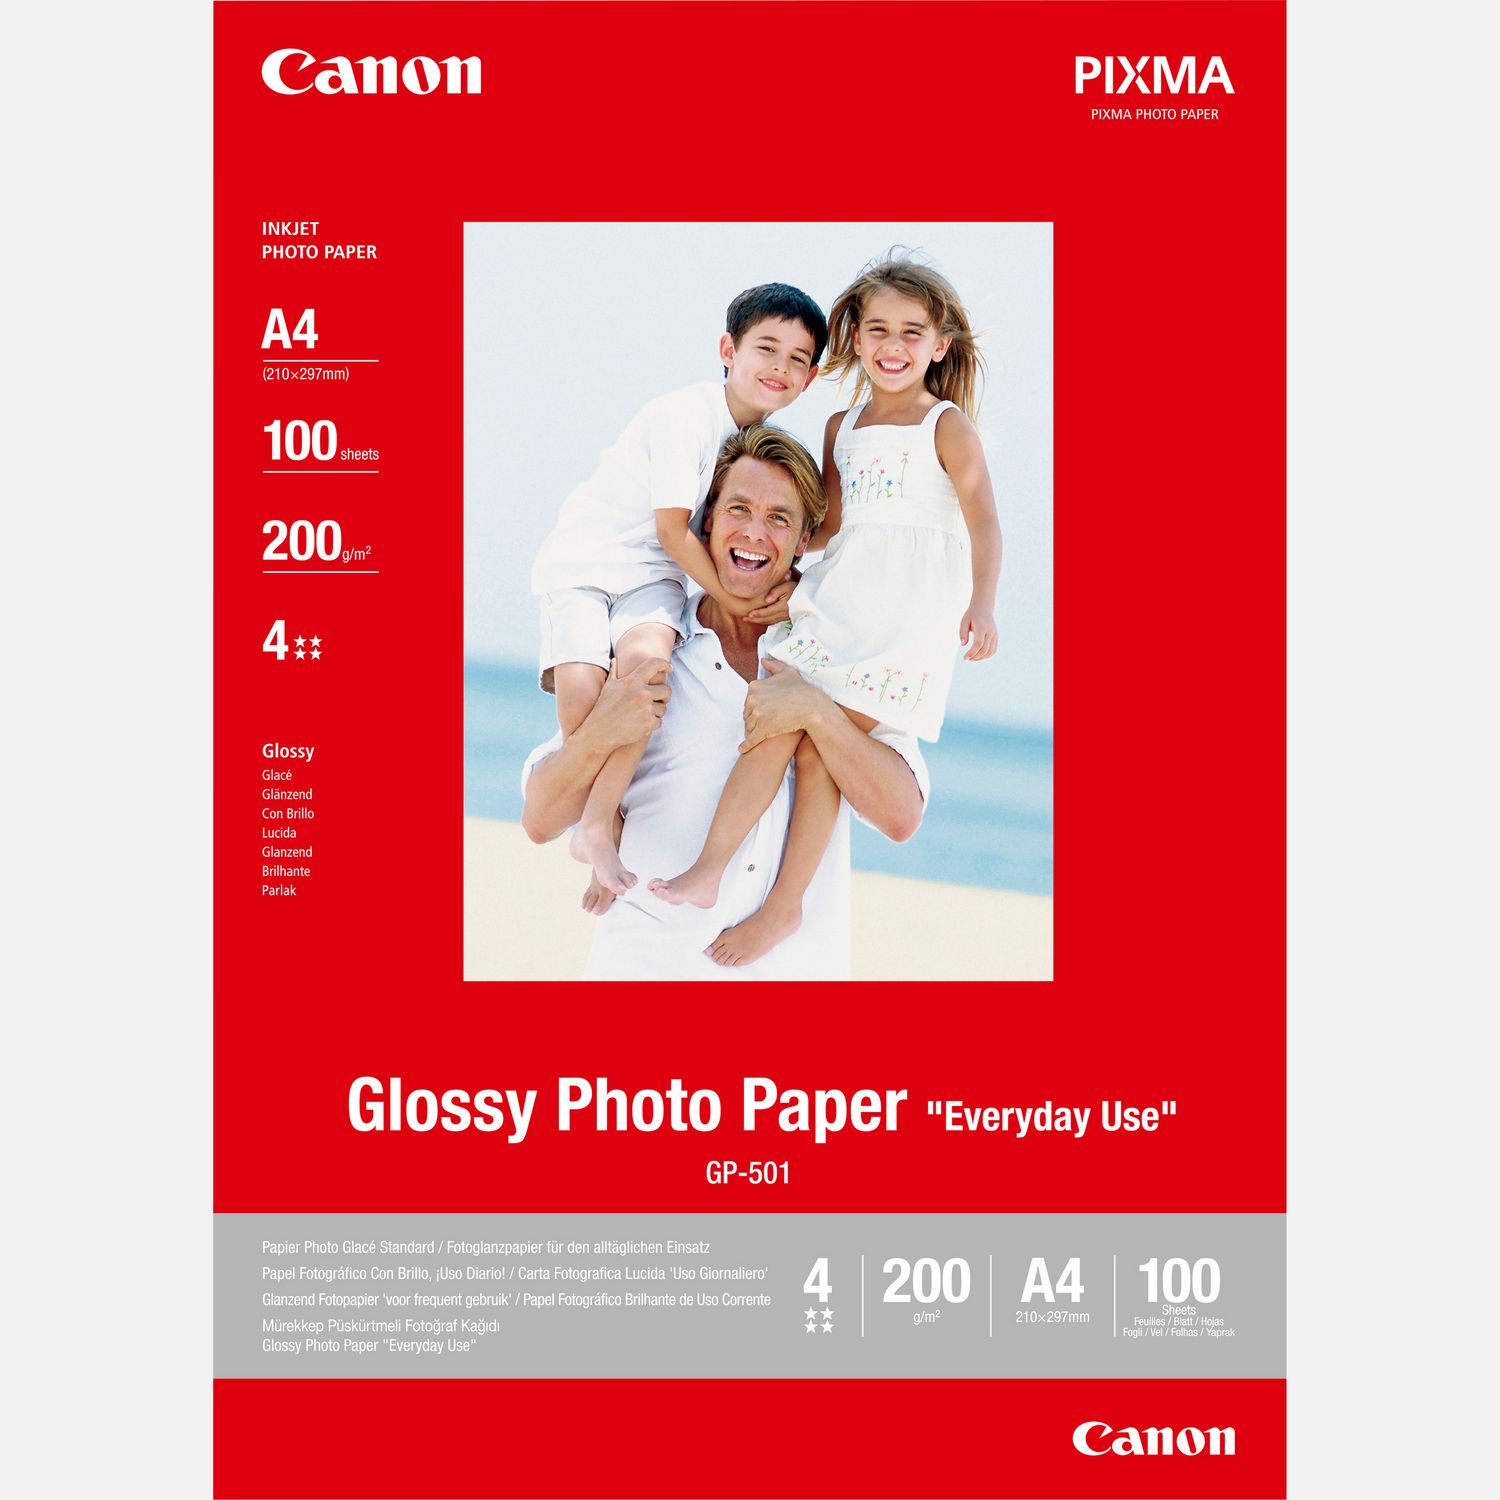 kloon Ongeldig glans Buy Canon GP-501 Glossy Photo Paper A4 - 100 Sheets — Canon UAE Store